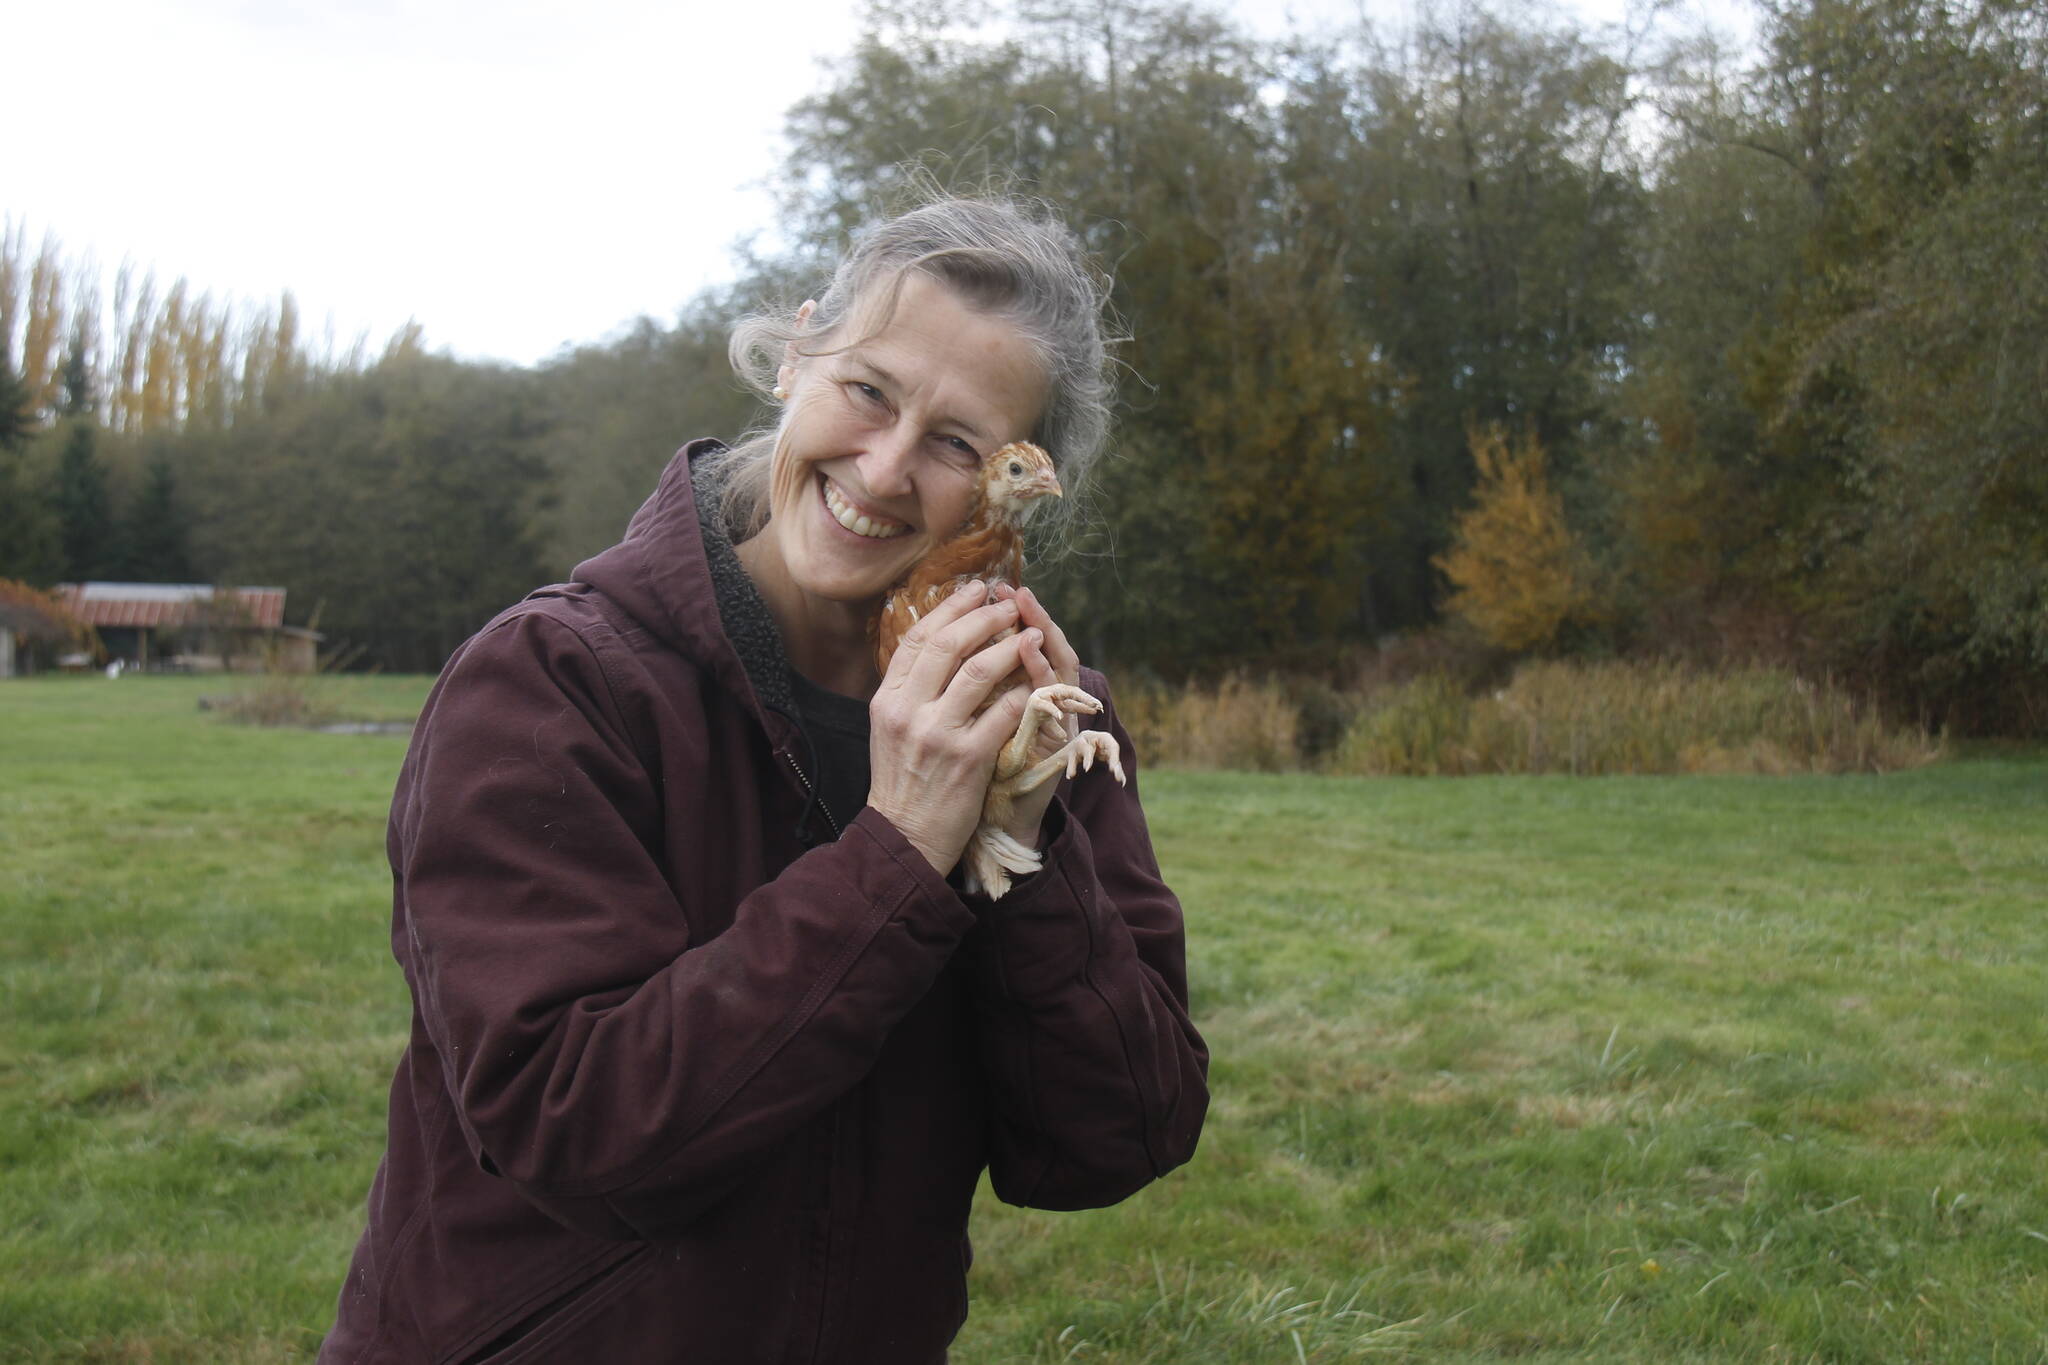 Organic Farm School graduate Maria Converse has hatched a plan to raise 115 robust egg-layers at the educational institution in the Maxwelton Valley. (Photo by Kira Erickson/South Whidbey Record)